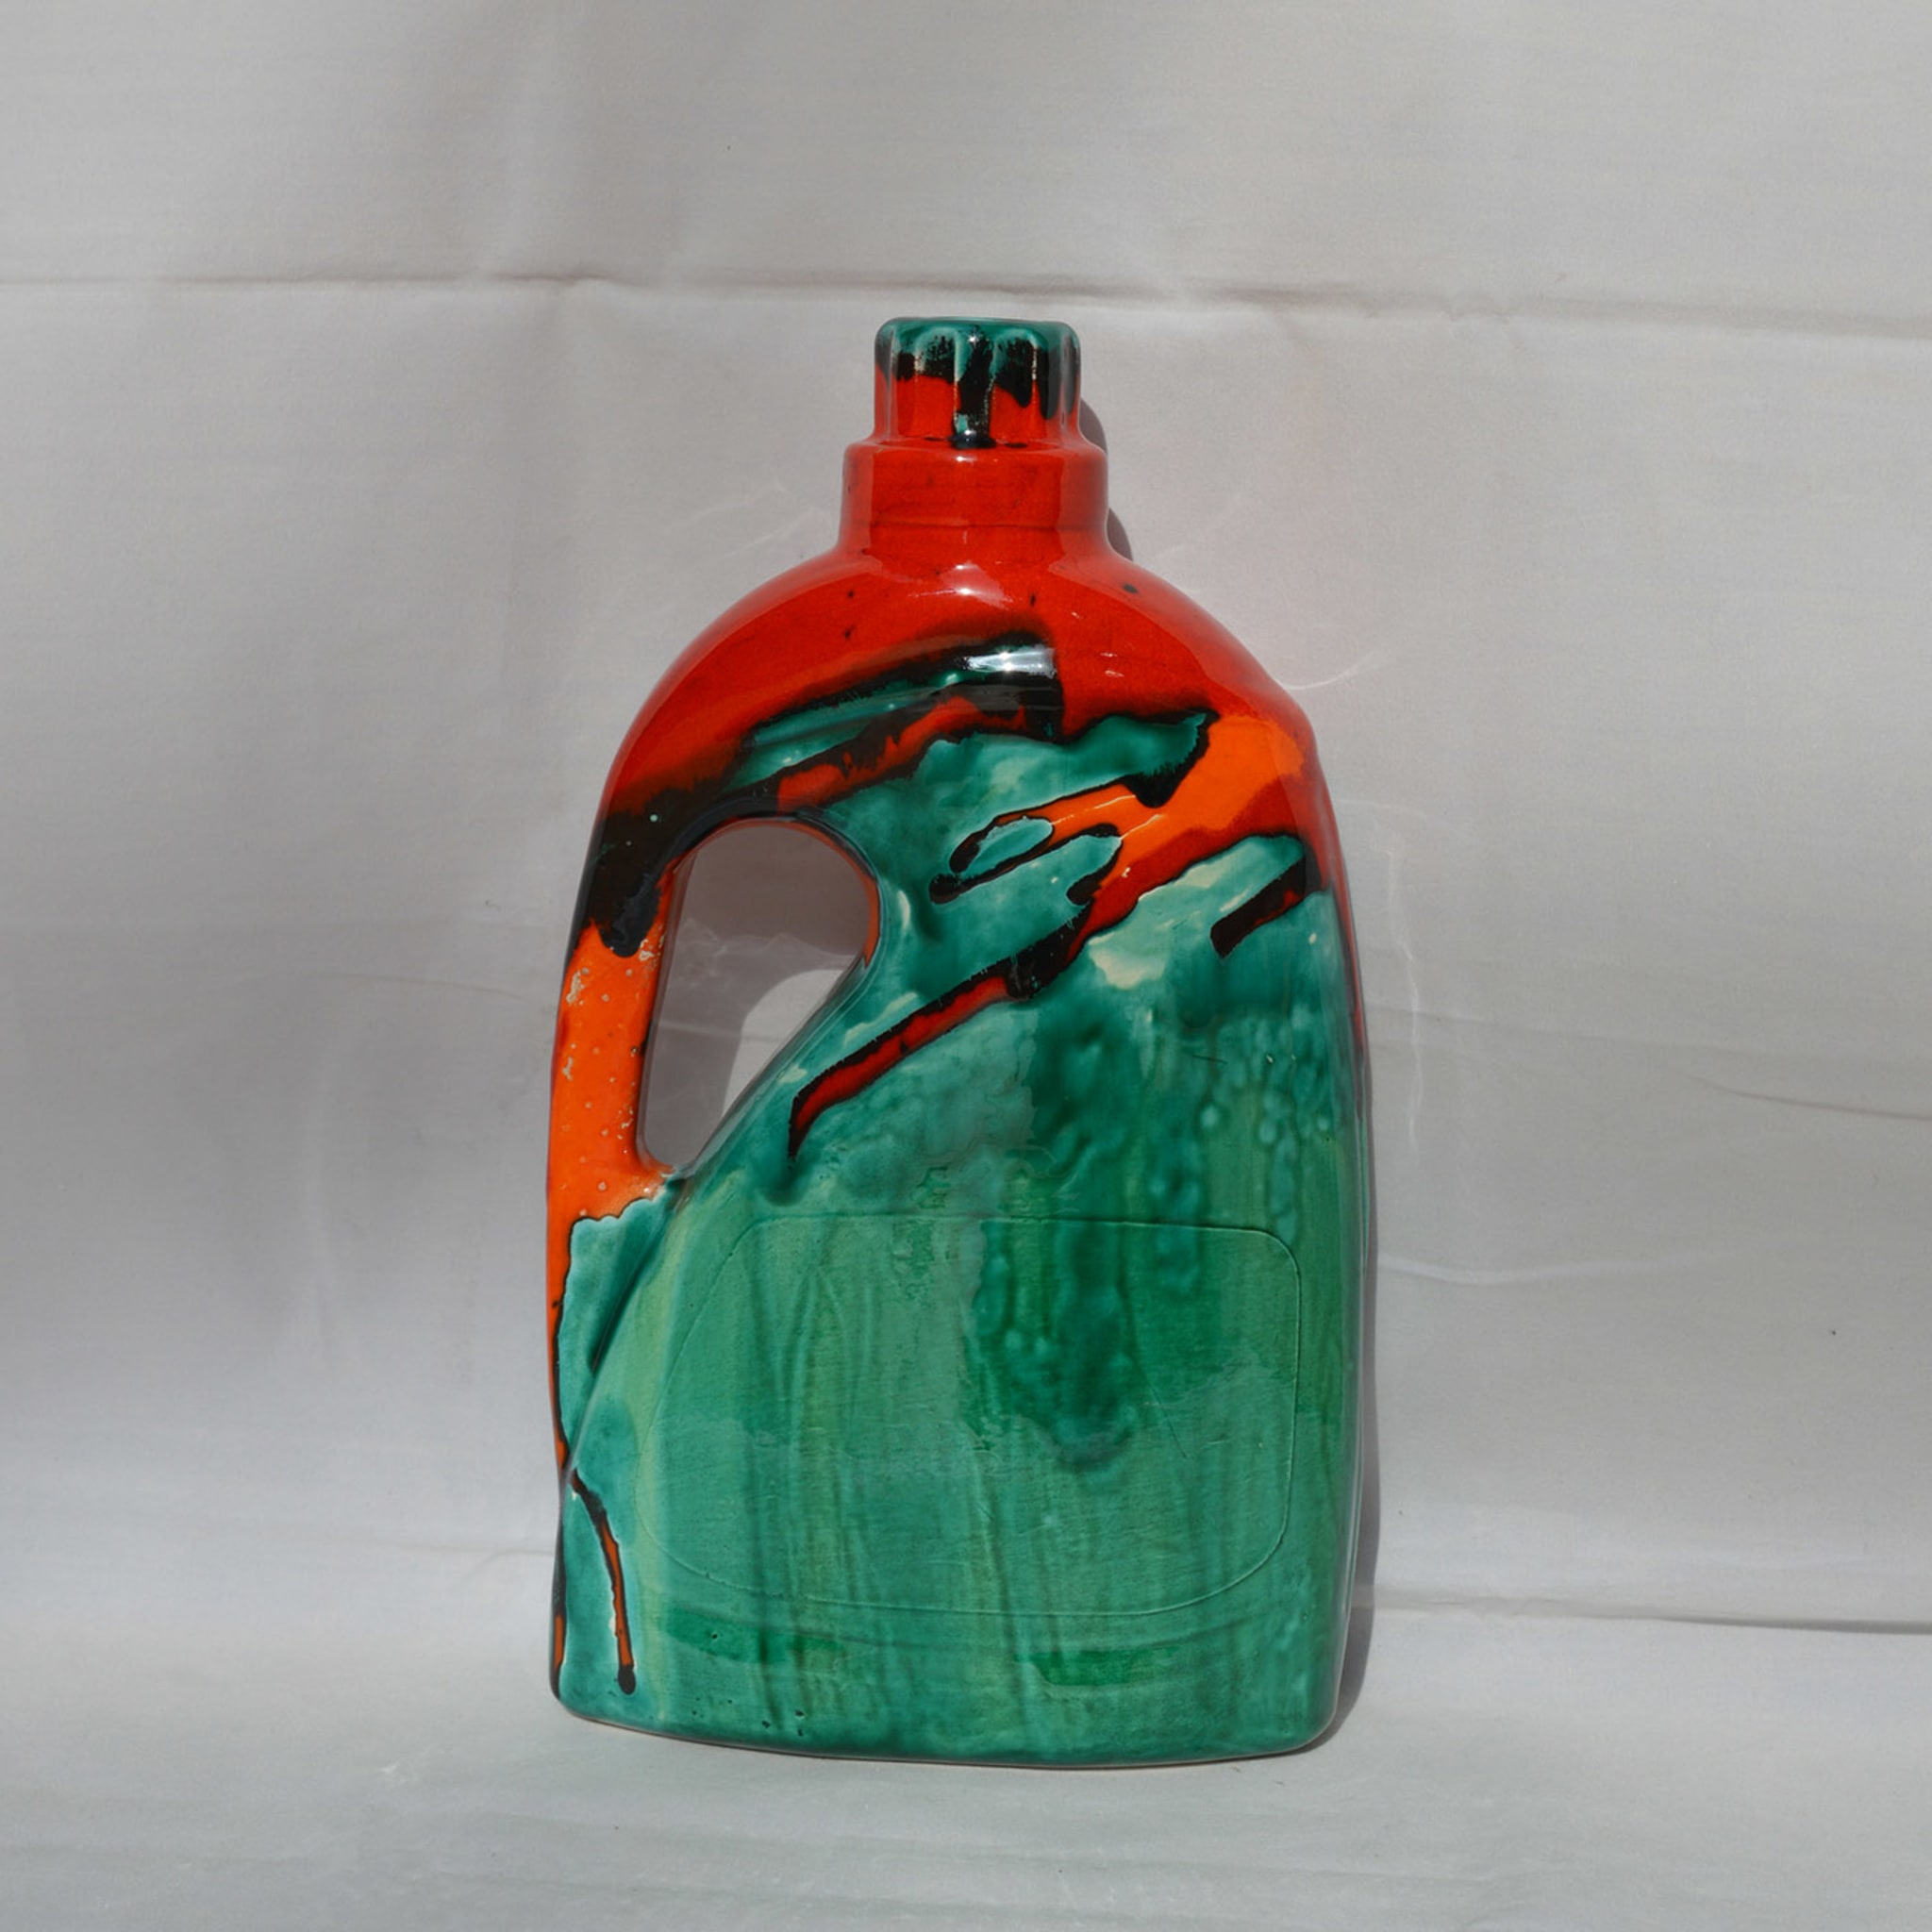 More Clay Less Plastic Green and Red Bottle - Alternative view 1